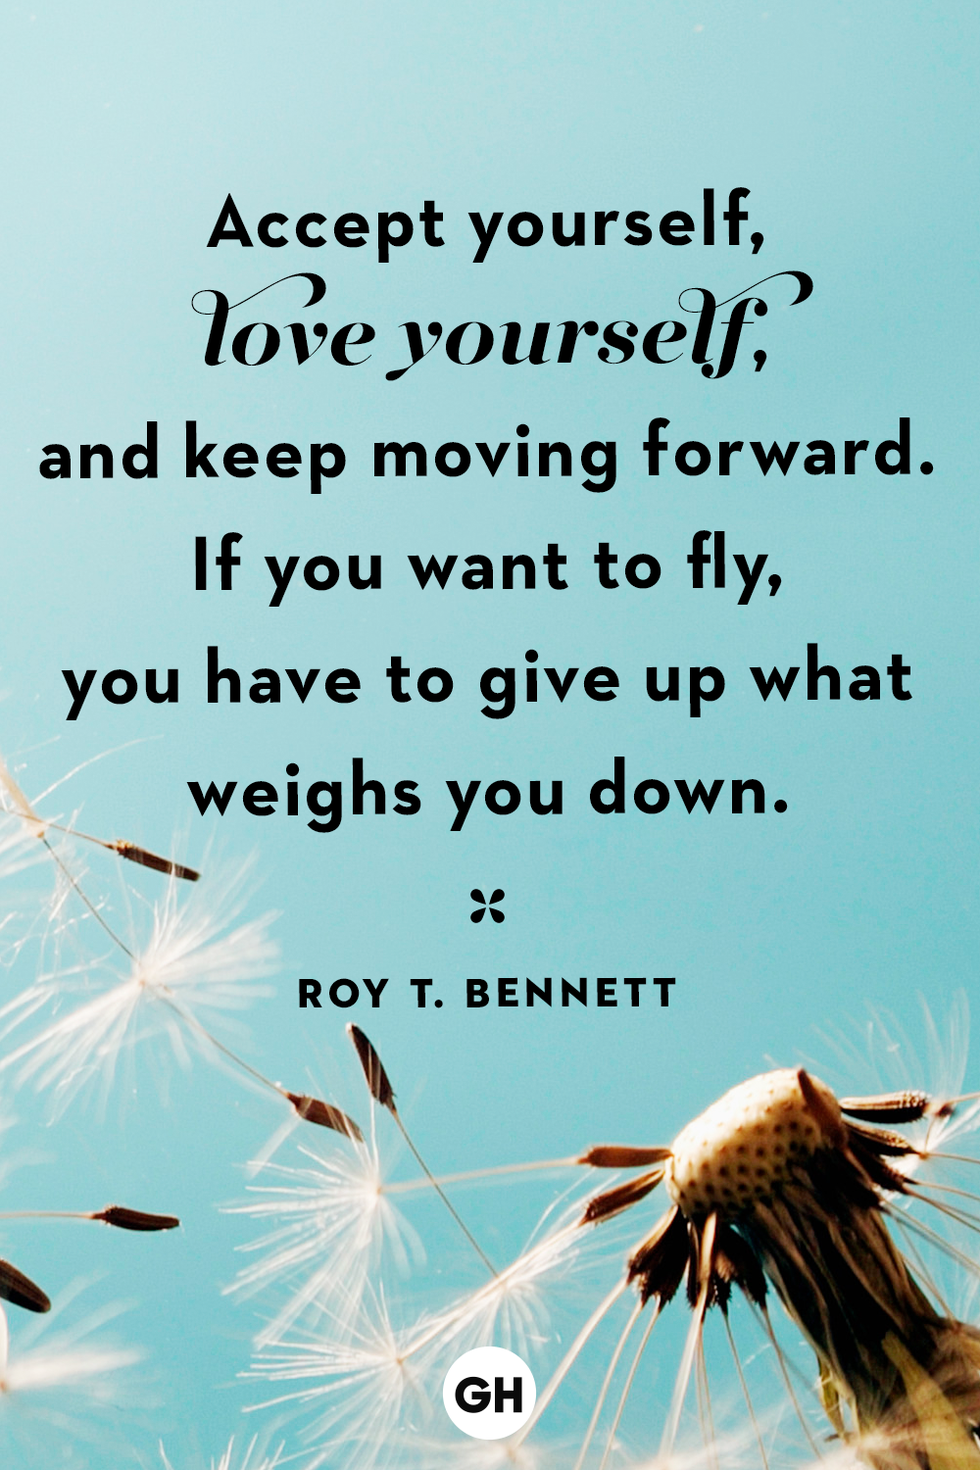 life-quotes-roy-t-bennett-1665419727.png